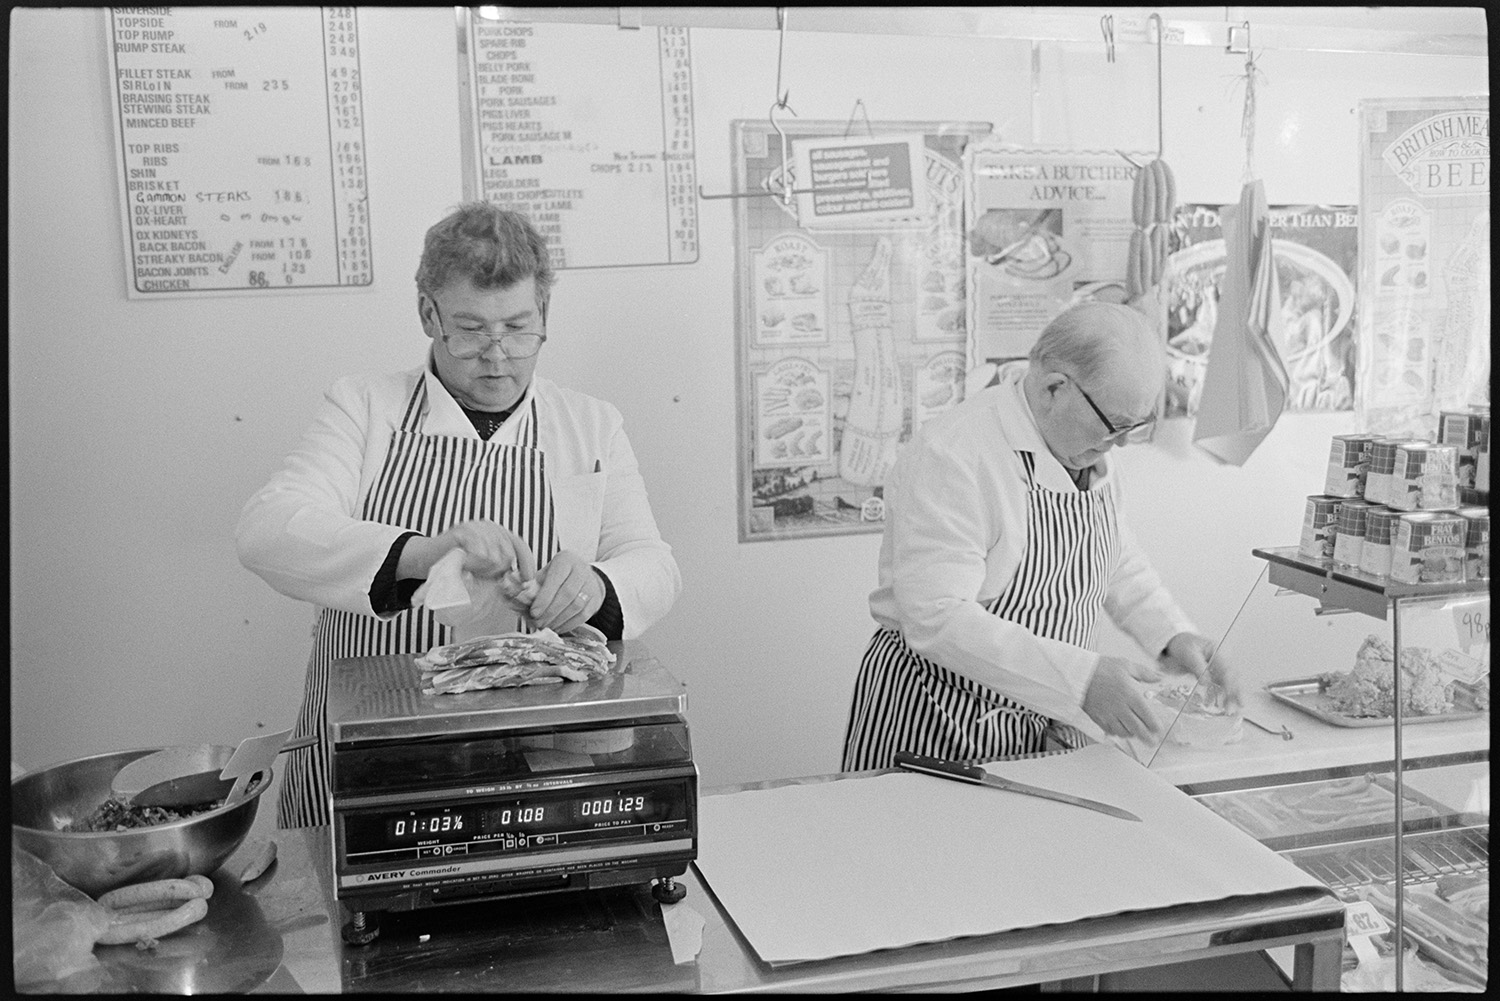 Butchers shop, proprietor and customers, cash desk, butcher weighing meat. 
[Two butchers preparing meat on the counter of W Cann butcher's shop in South Molton Street, Chulmleigh. One of them is weighing meat. Posters and a price list are displayed behind the counter.]